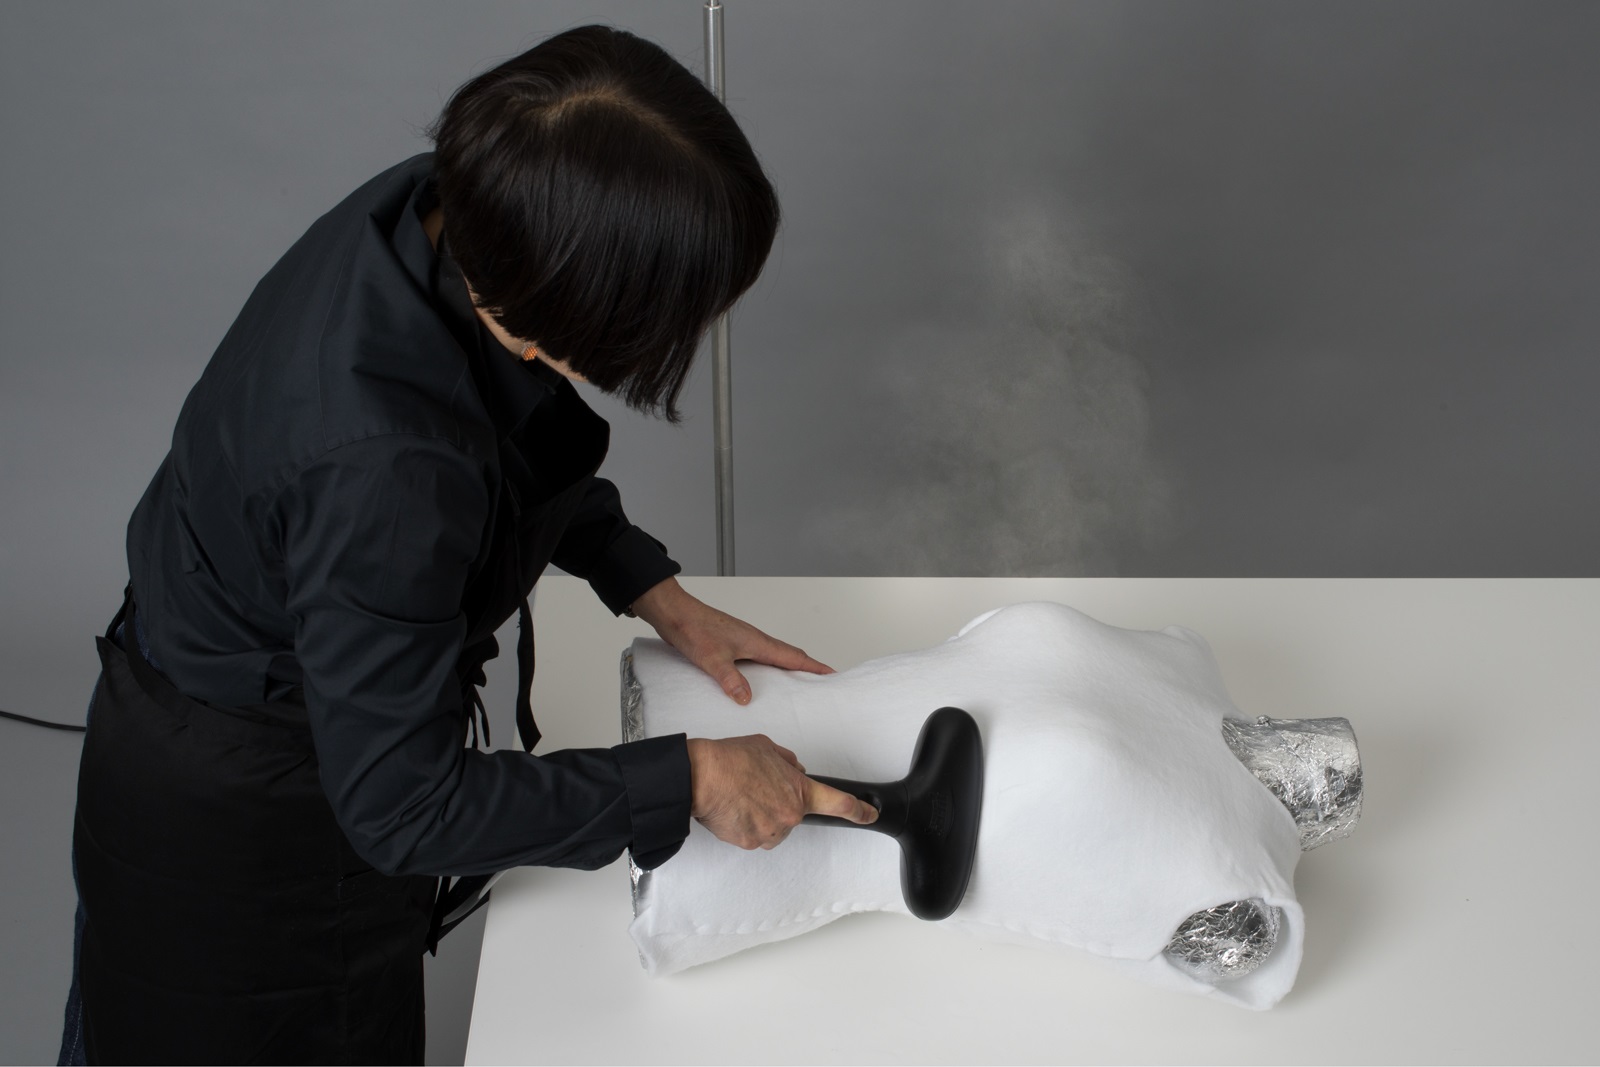 A woman works on a dress form lying on the table in front of her. The dress form is covered in aluminium foil over which Suzanne is steam-moulding a synthetic white felt in order to create a stylised body shape.